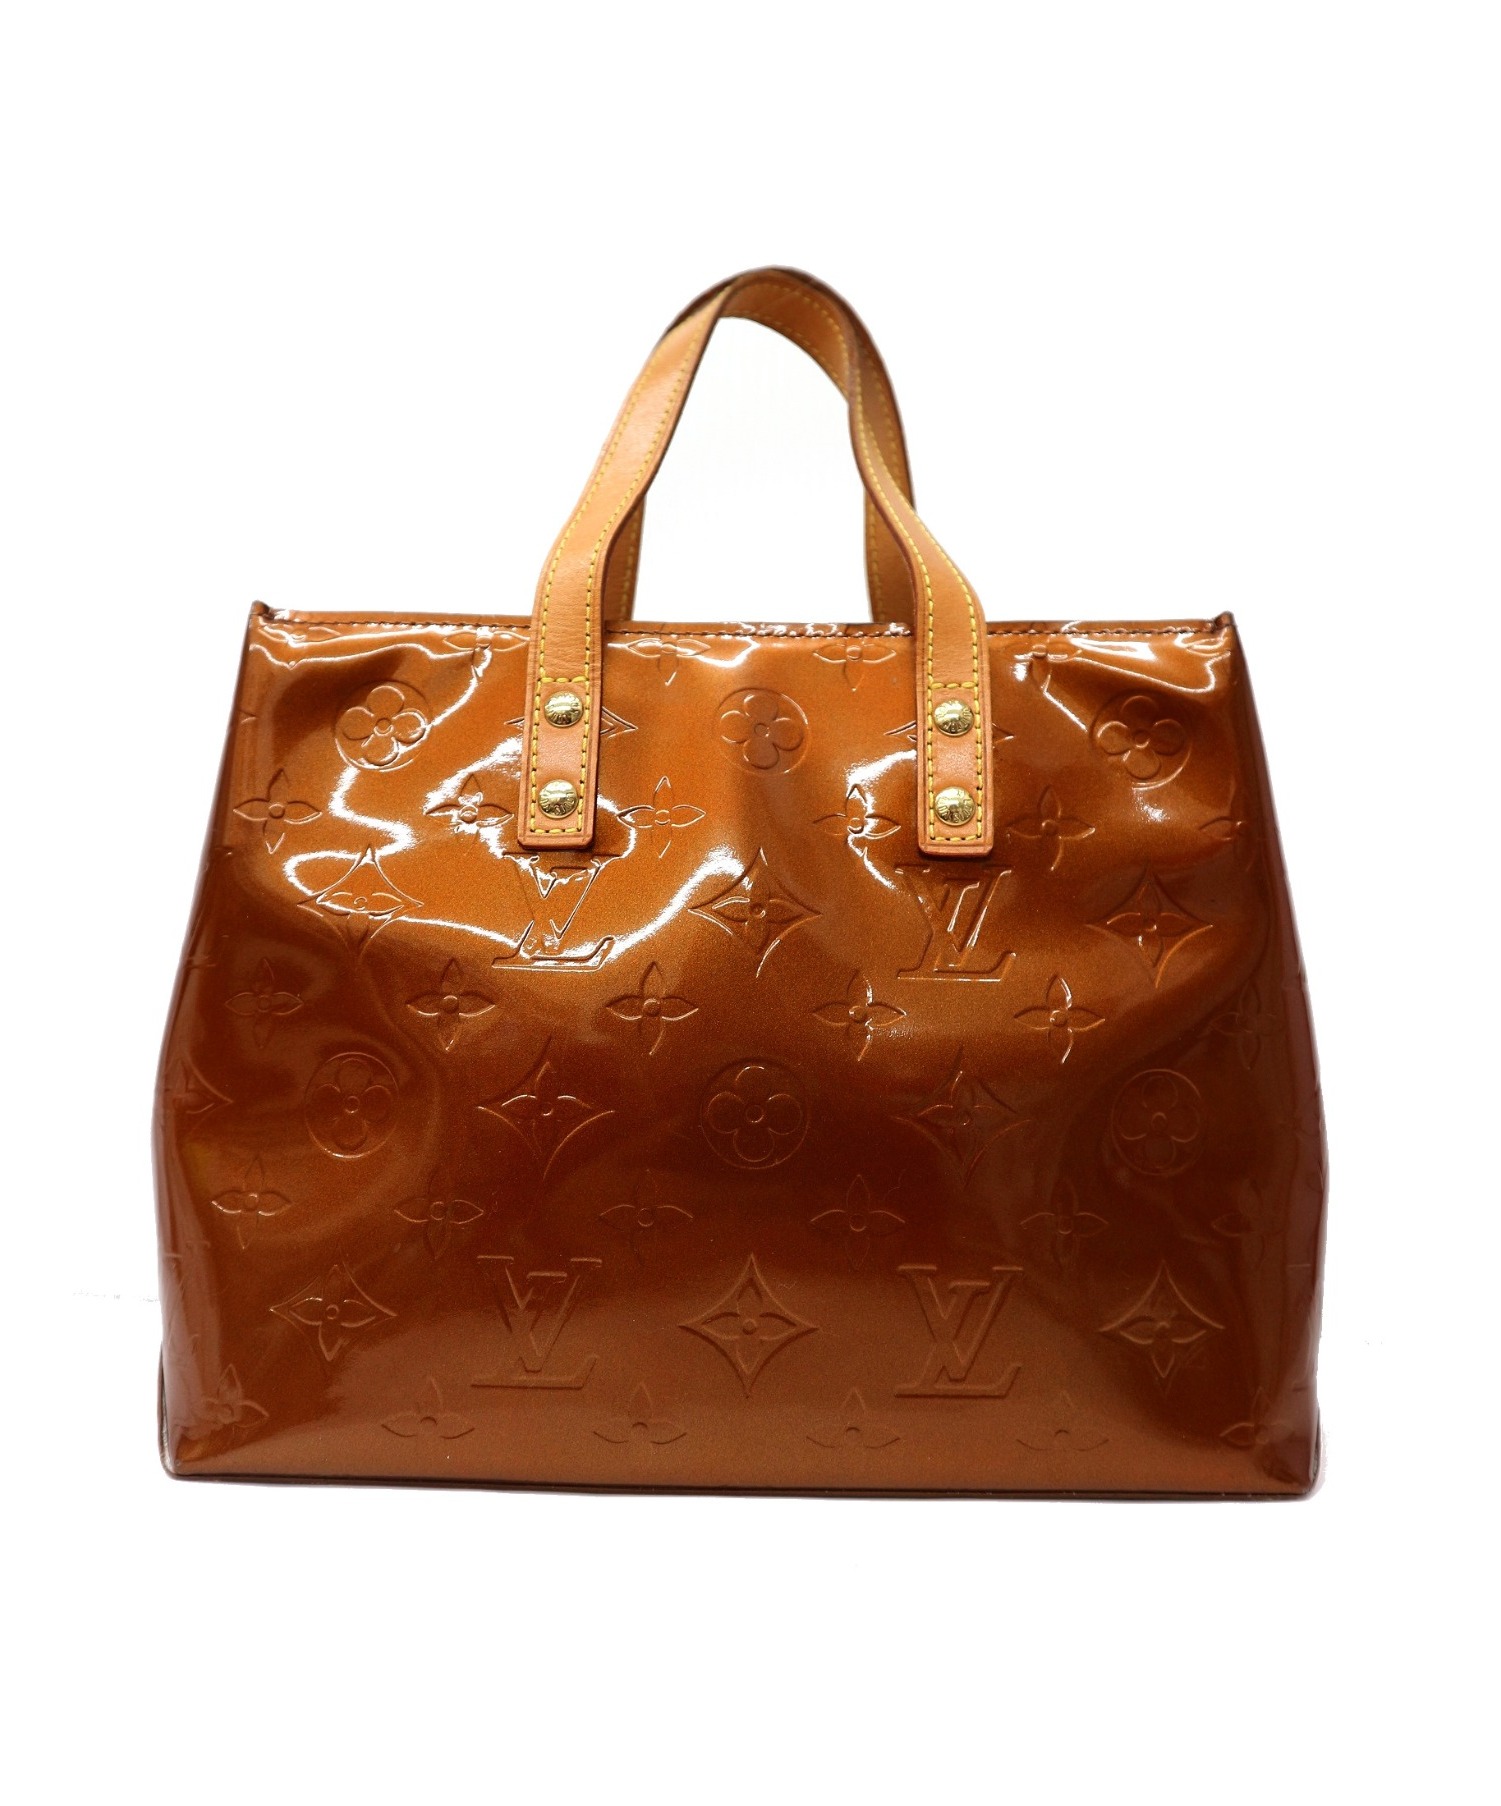 Shop Louis Vuitton Onthego pm (M45653) by CATSUSELECT